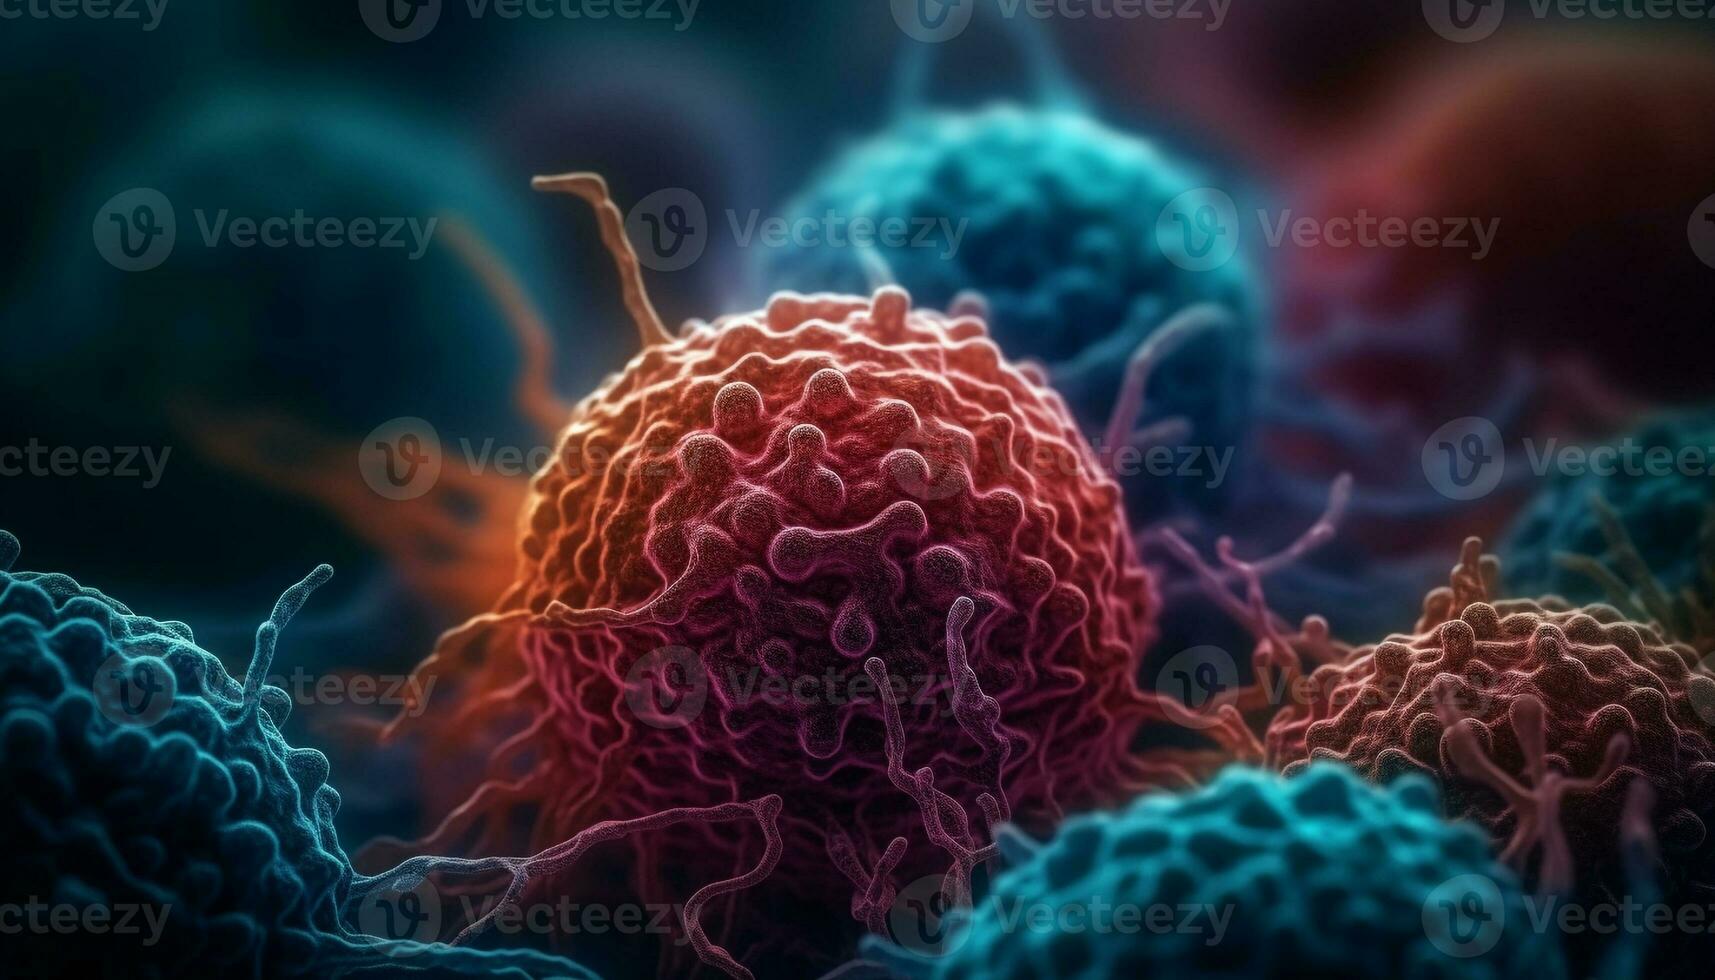 Cells at Work Cancer Cell HD 4K Wallpaper 53006